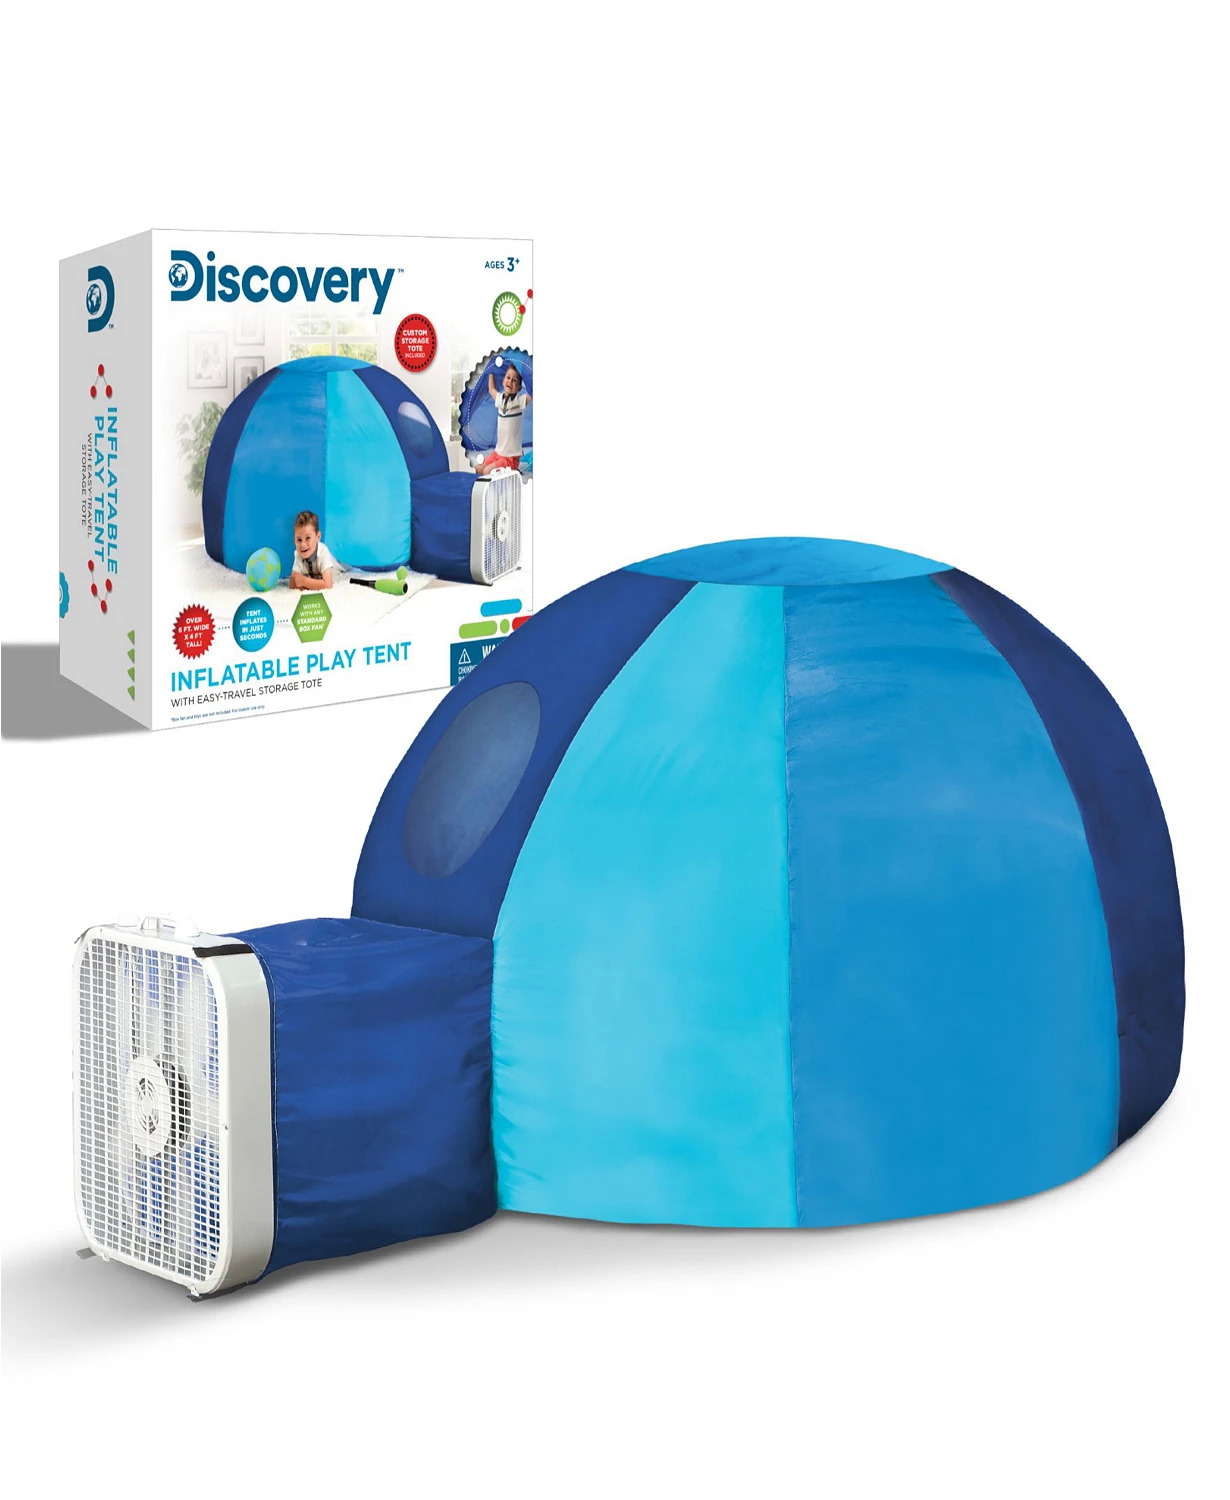 Discovery Kids' Inflatable Dome Toy Tent w/ Carrying Case $13 + Free Store Pickup at Macy's or FS on $25+